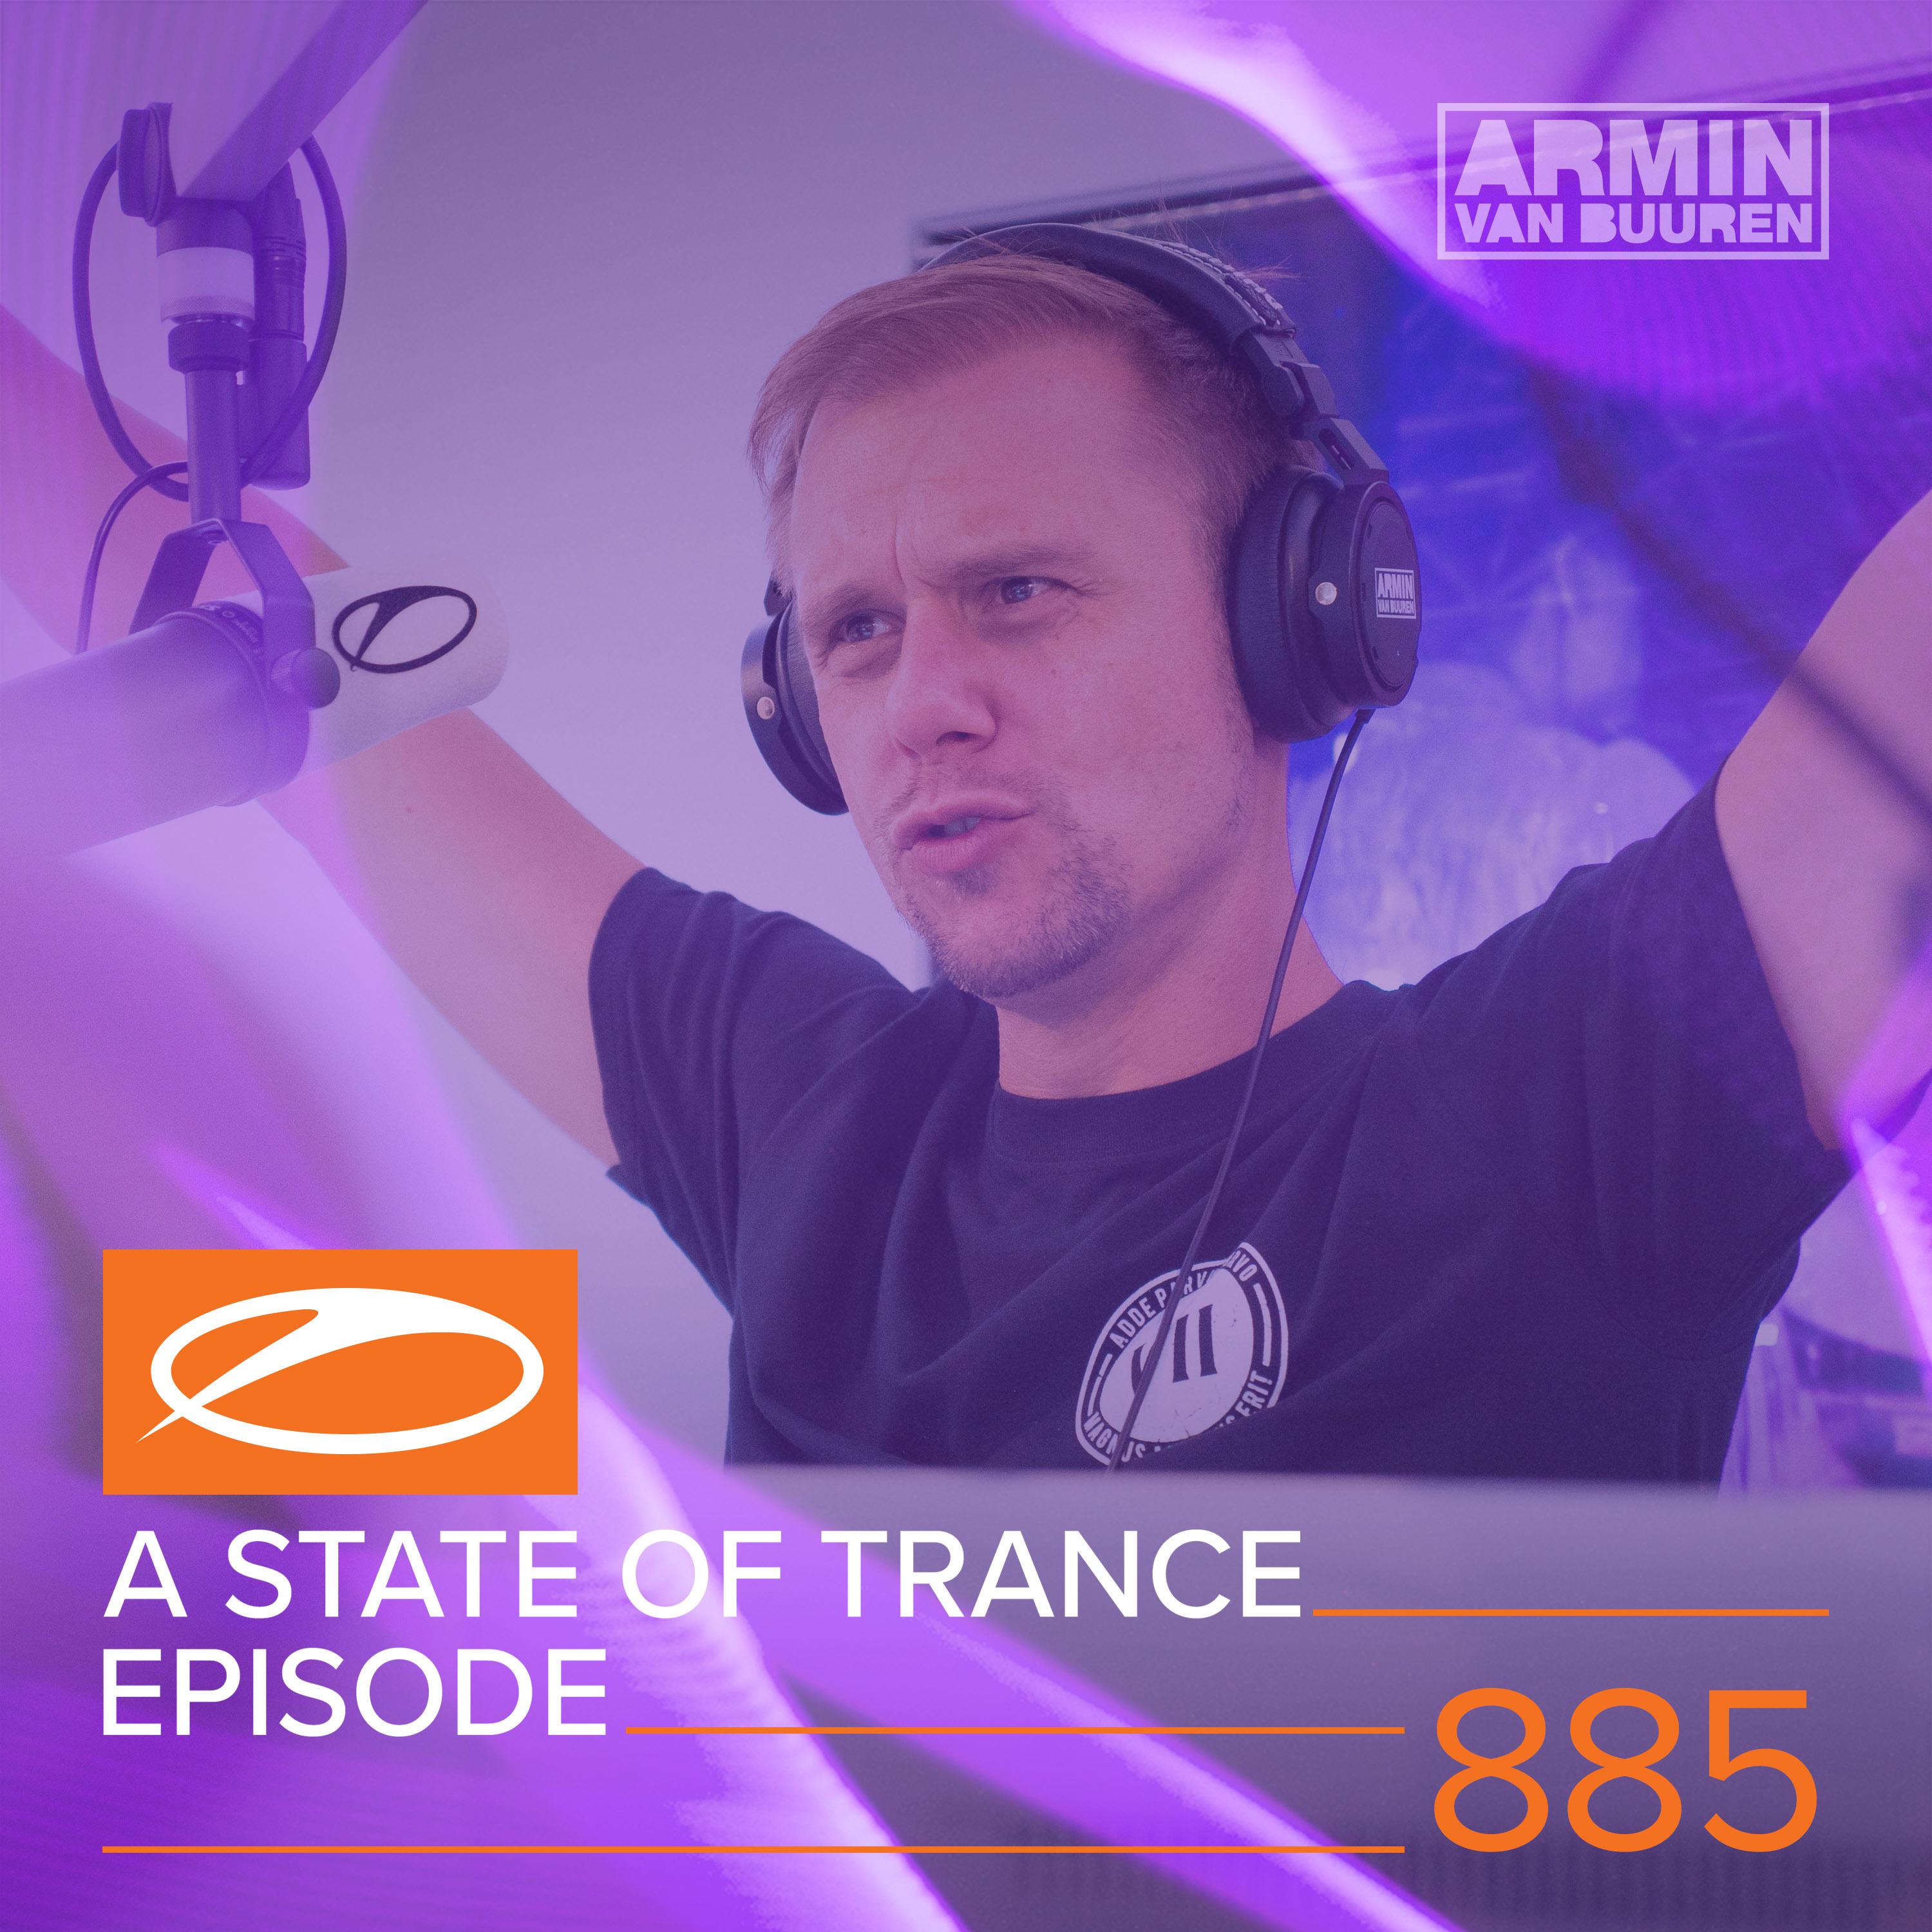 A State Of Trance (ASOT 885) (This Week's Service For Dreamers, Pt. 3)